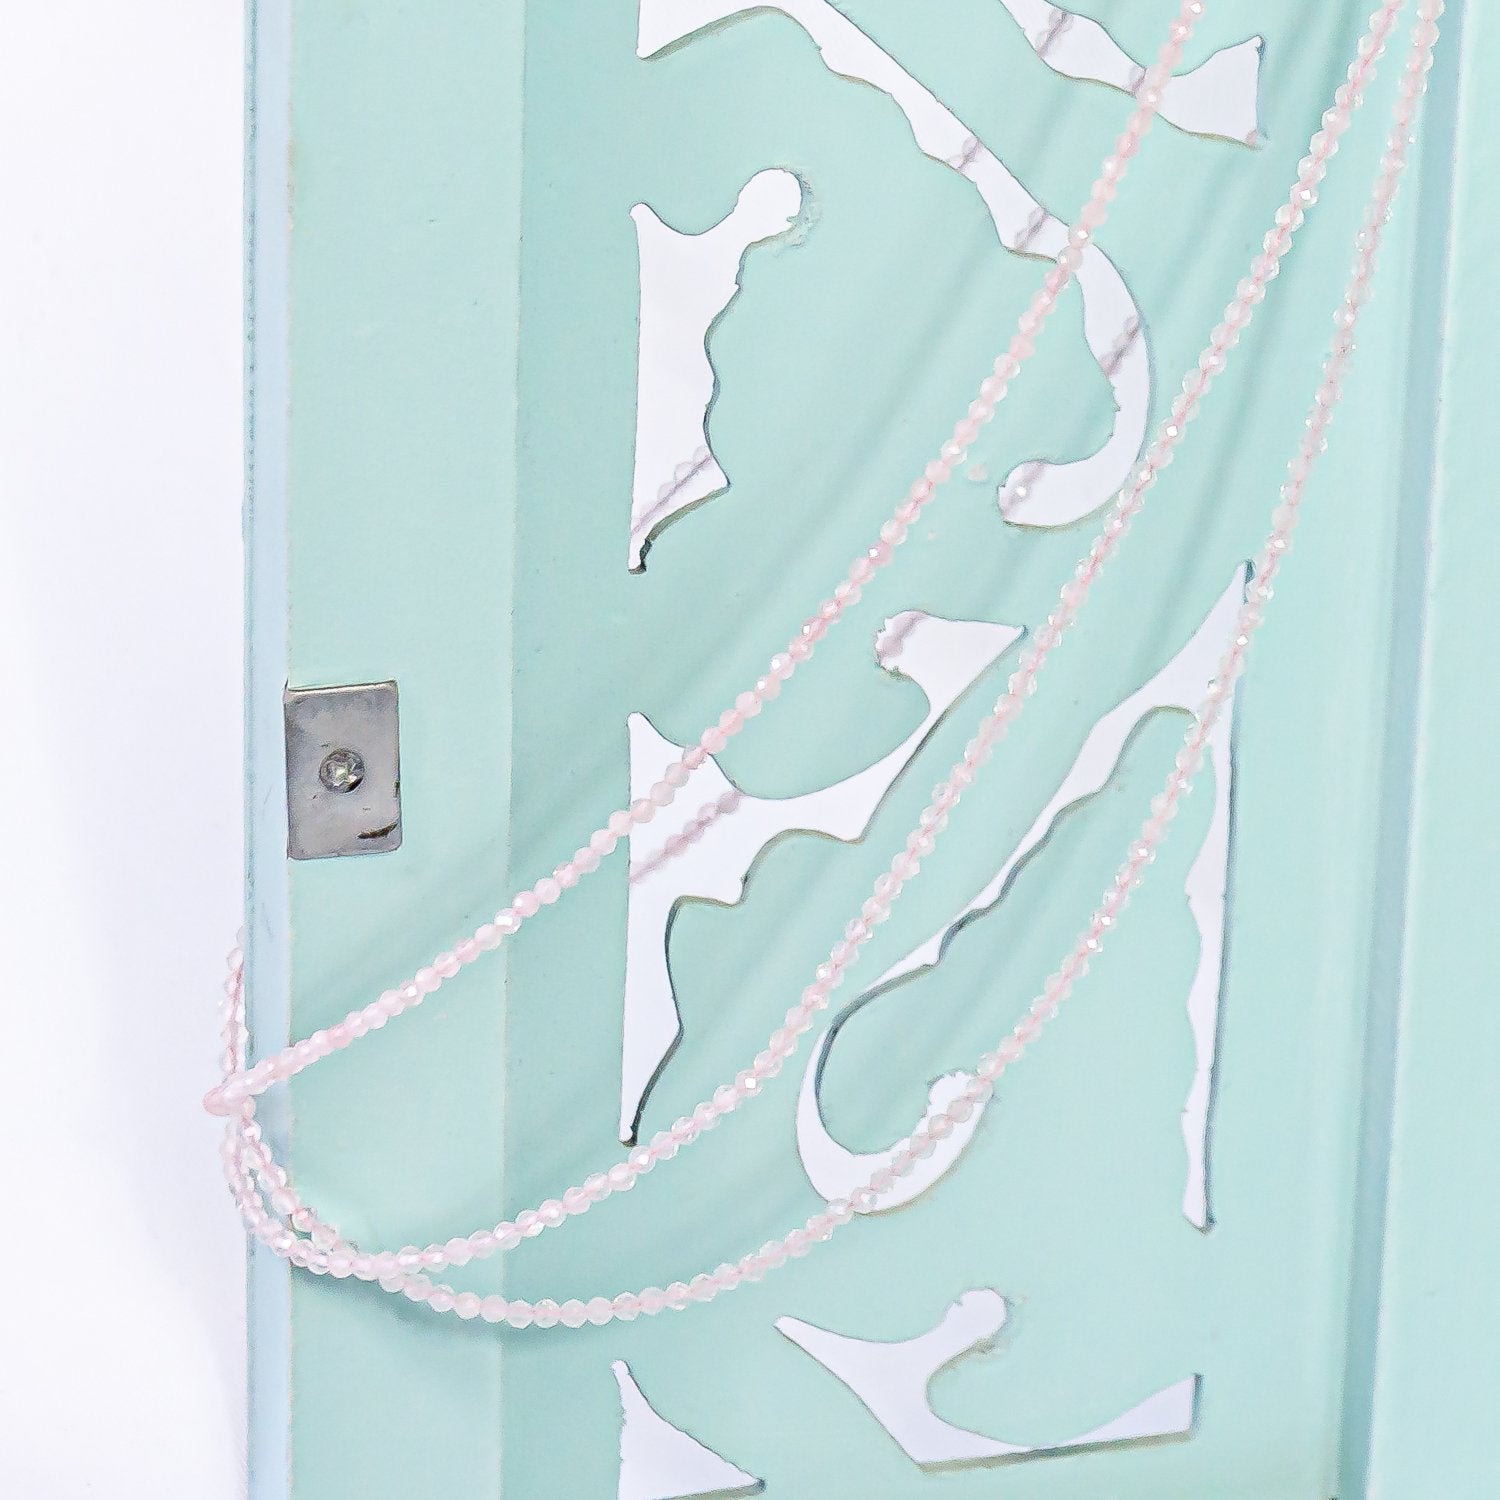 1mm rose quartz faceted crystal necklace hanging on jewelry cabinet door.